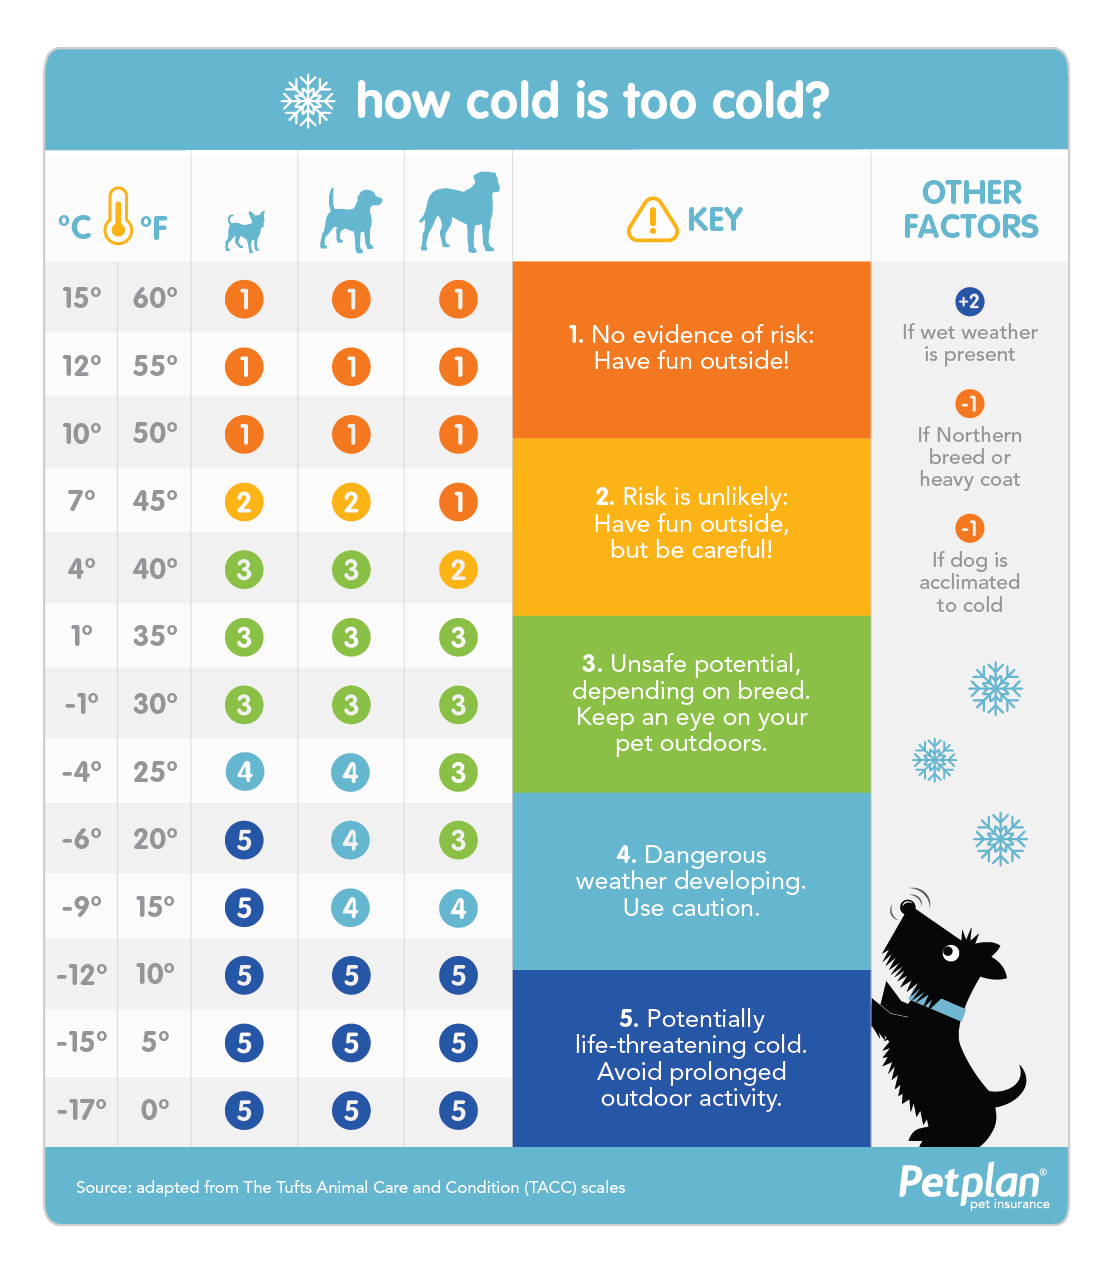 How cold is too cold?